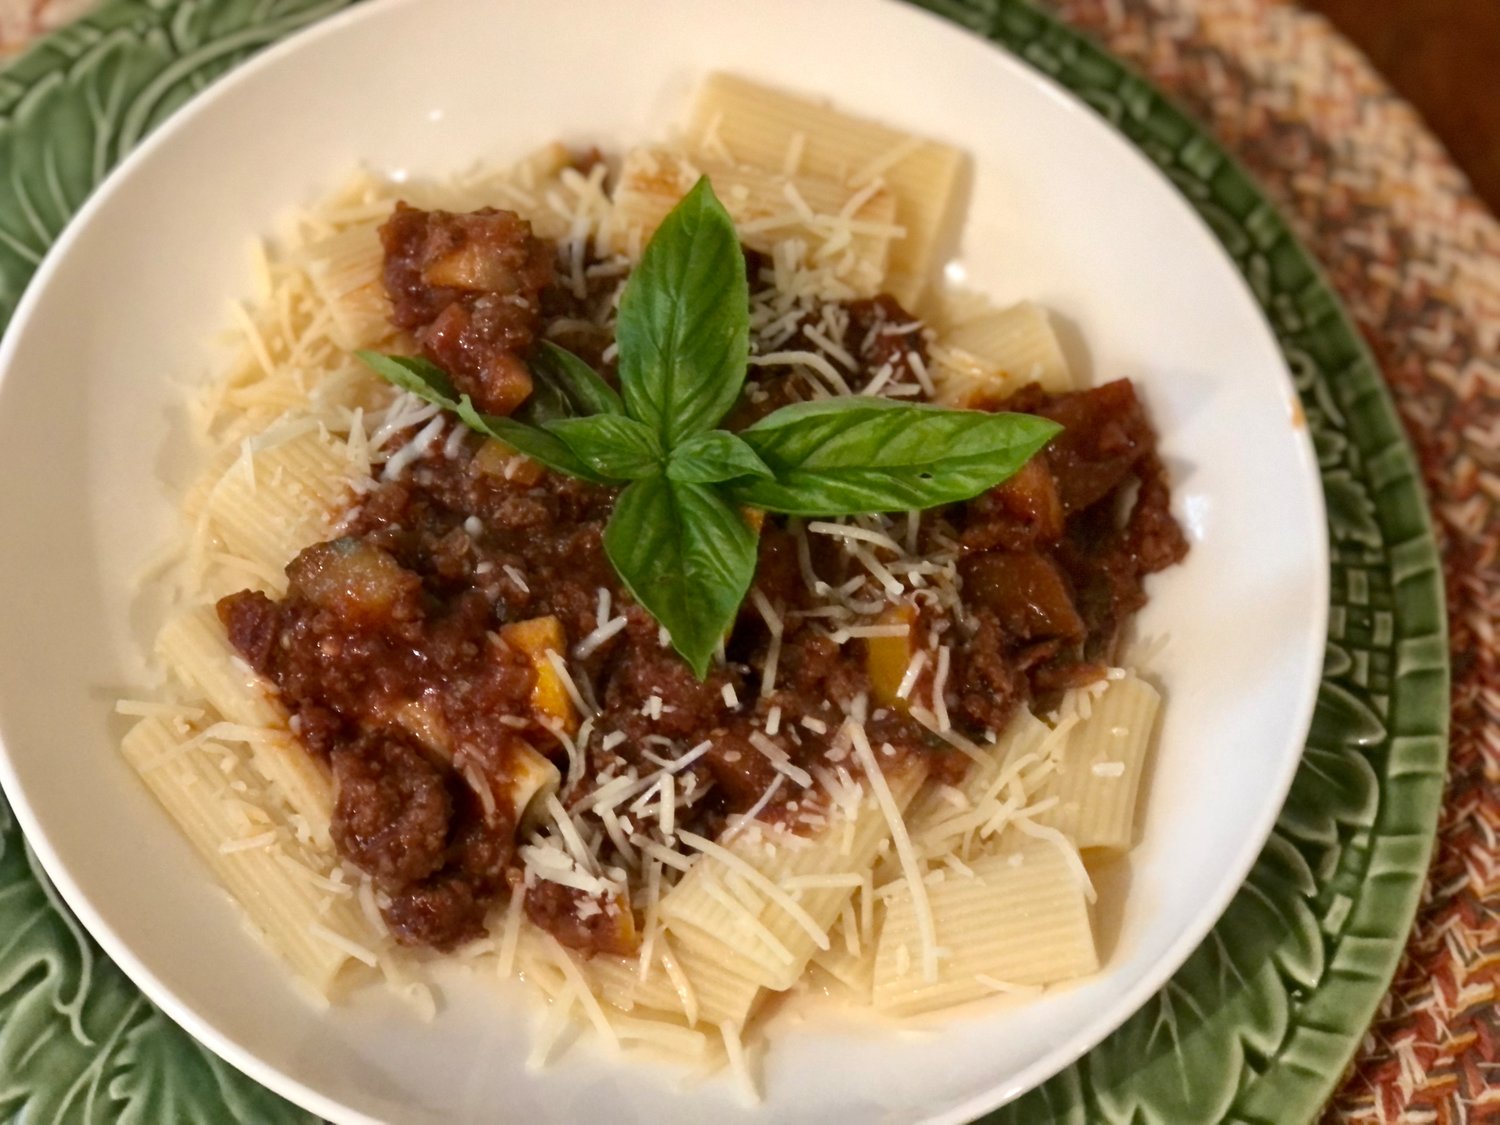 This Bolognese sauce is enriched with sautéed chunks of eggplant, zucchini and peppers.